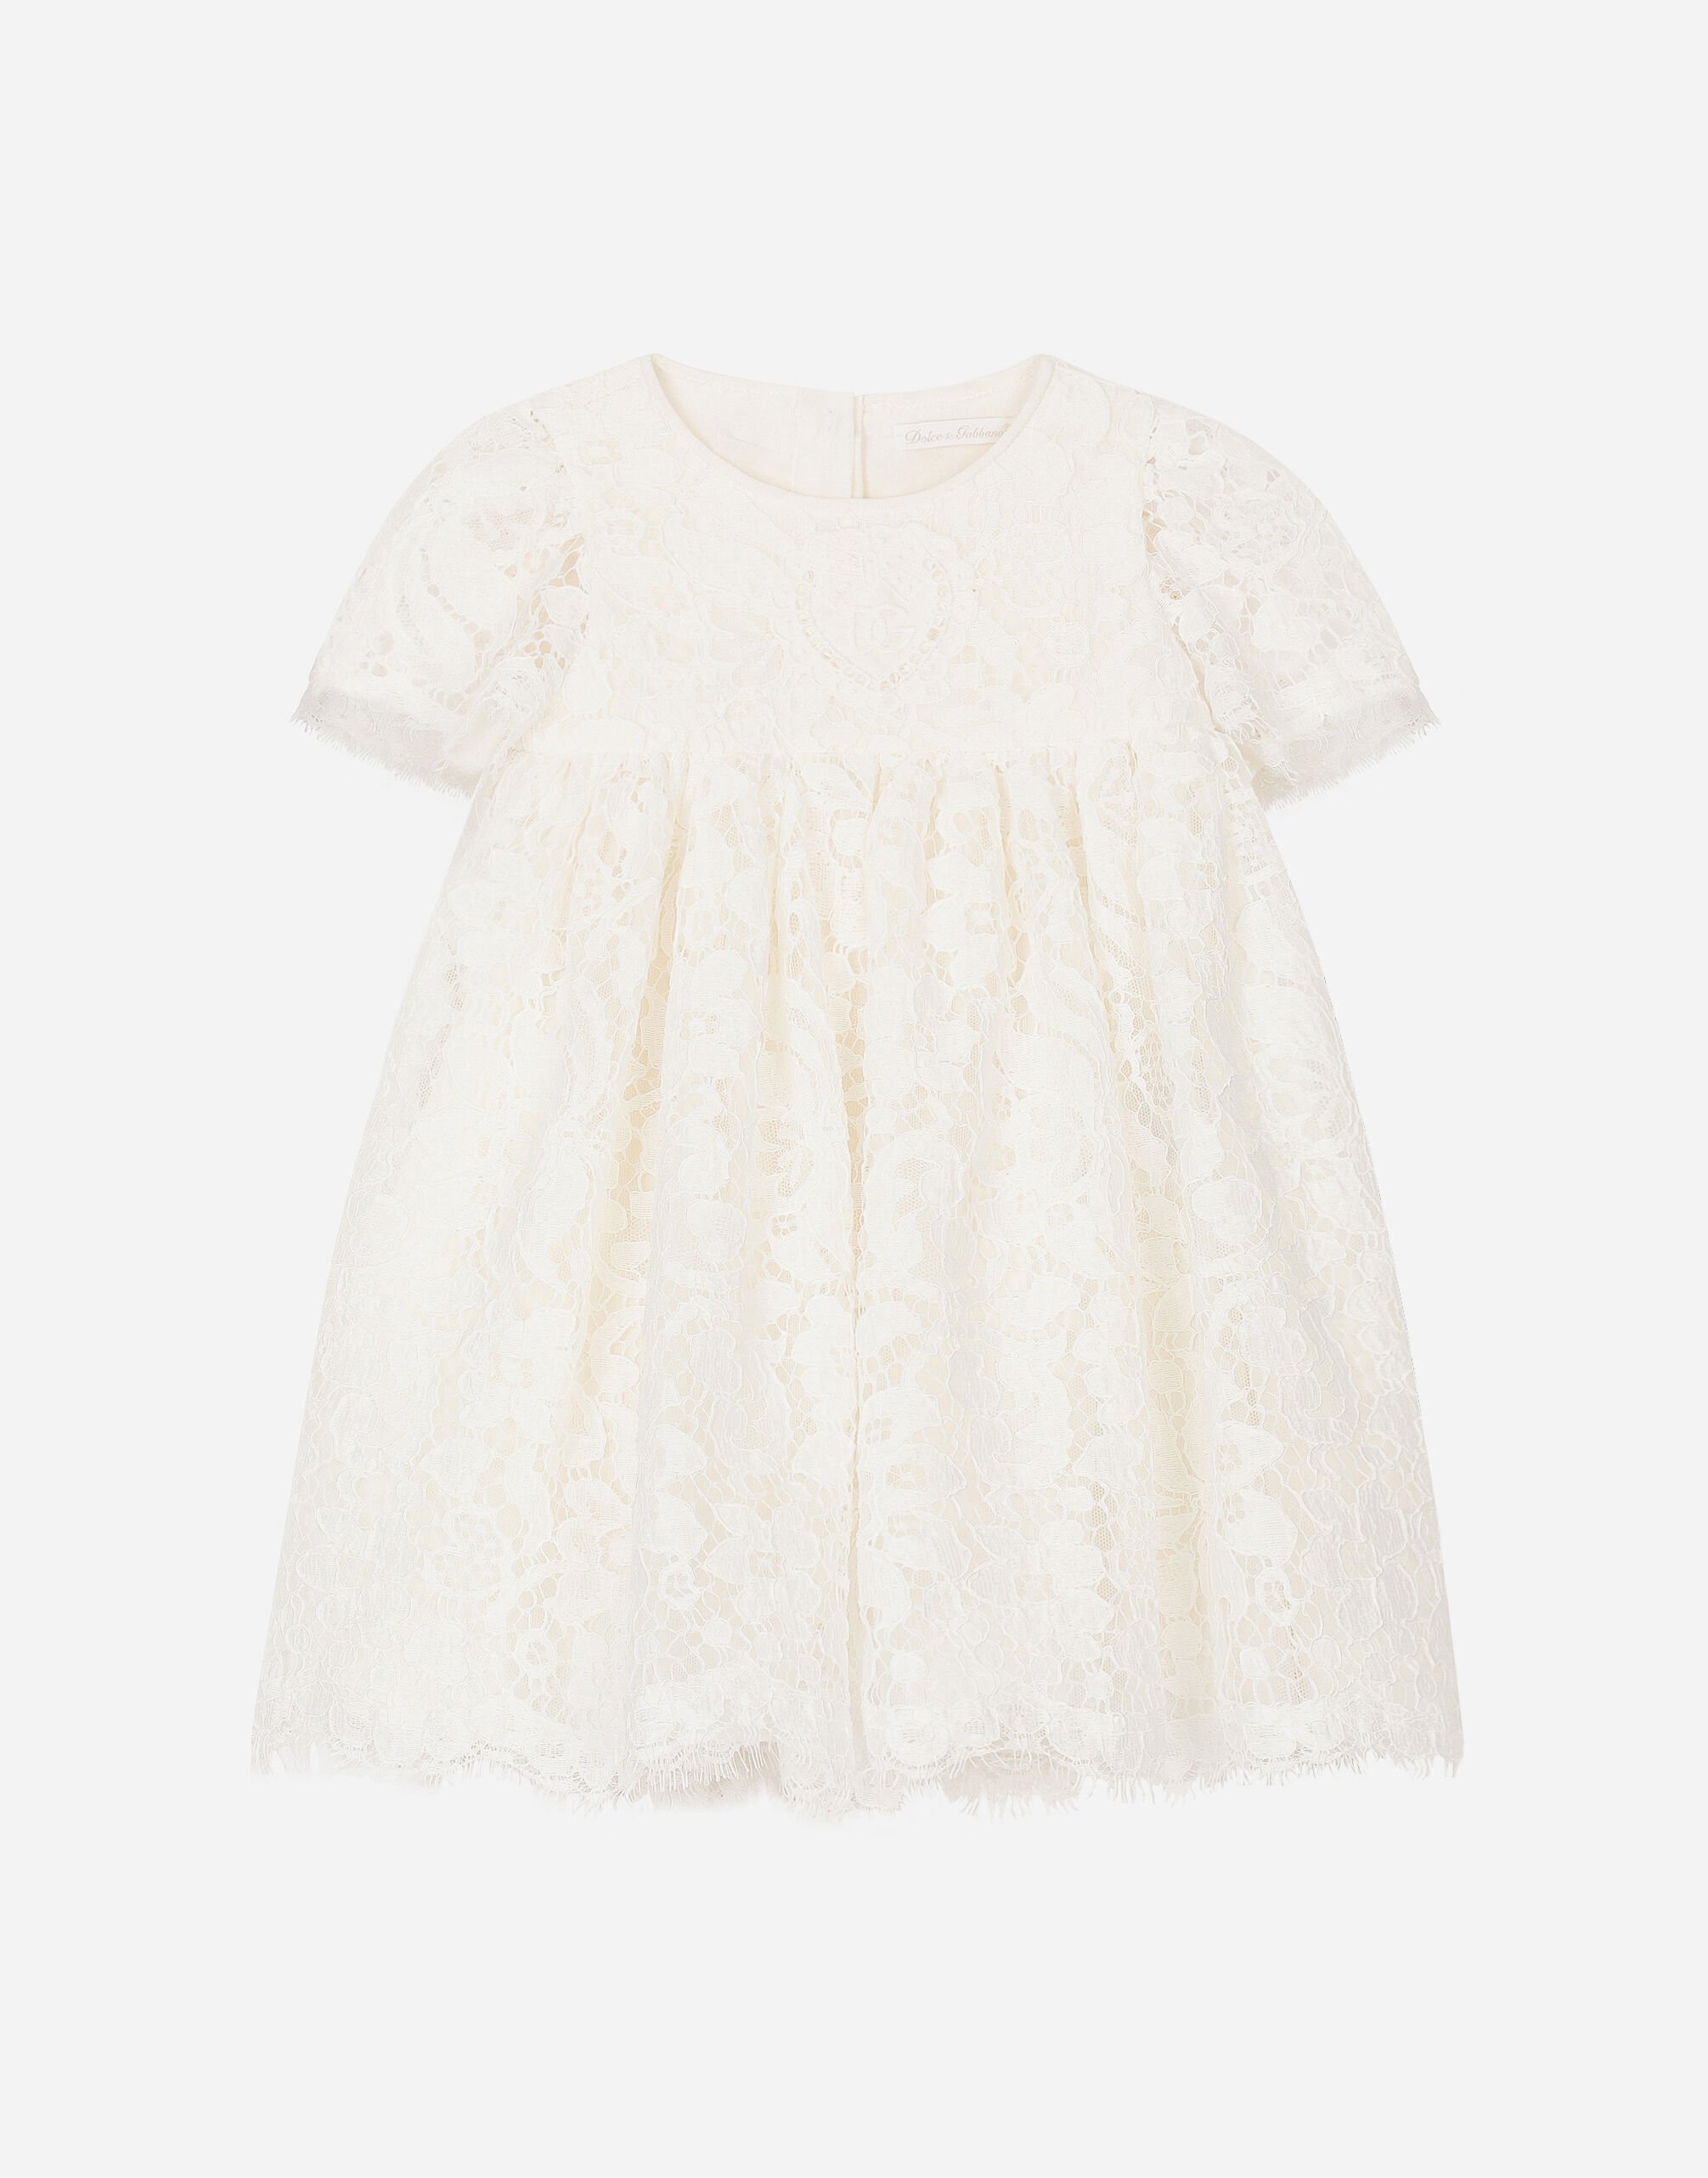 Dolce & Gabbana Empire-line lace christening dress with short sleeves Black LB1A58G0U05